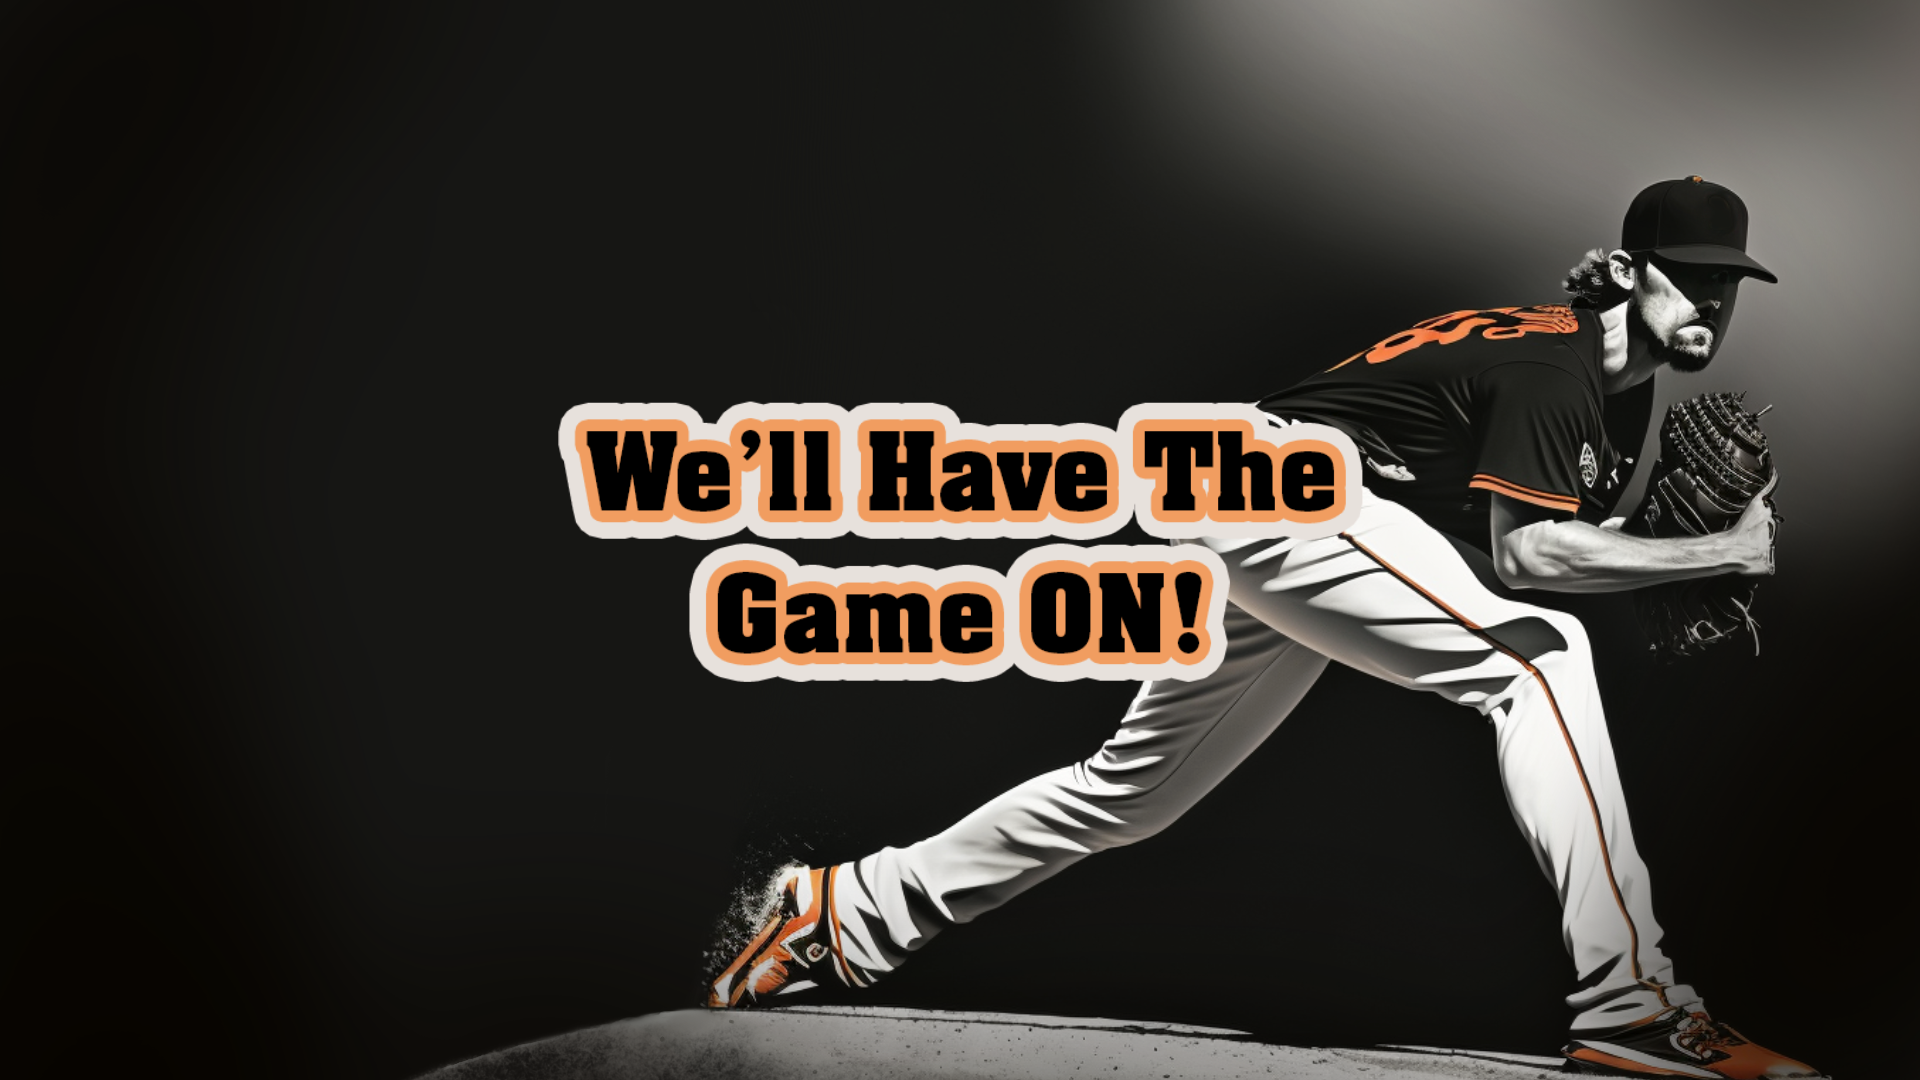 We'll have the SF Giants game on at DDs.